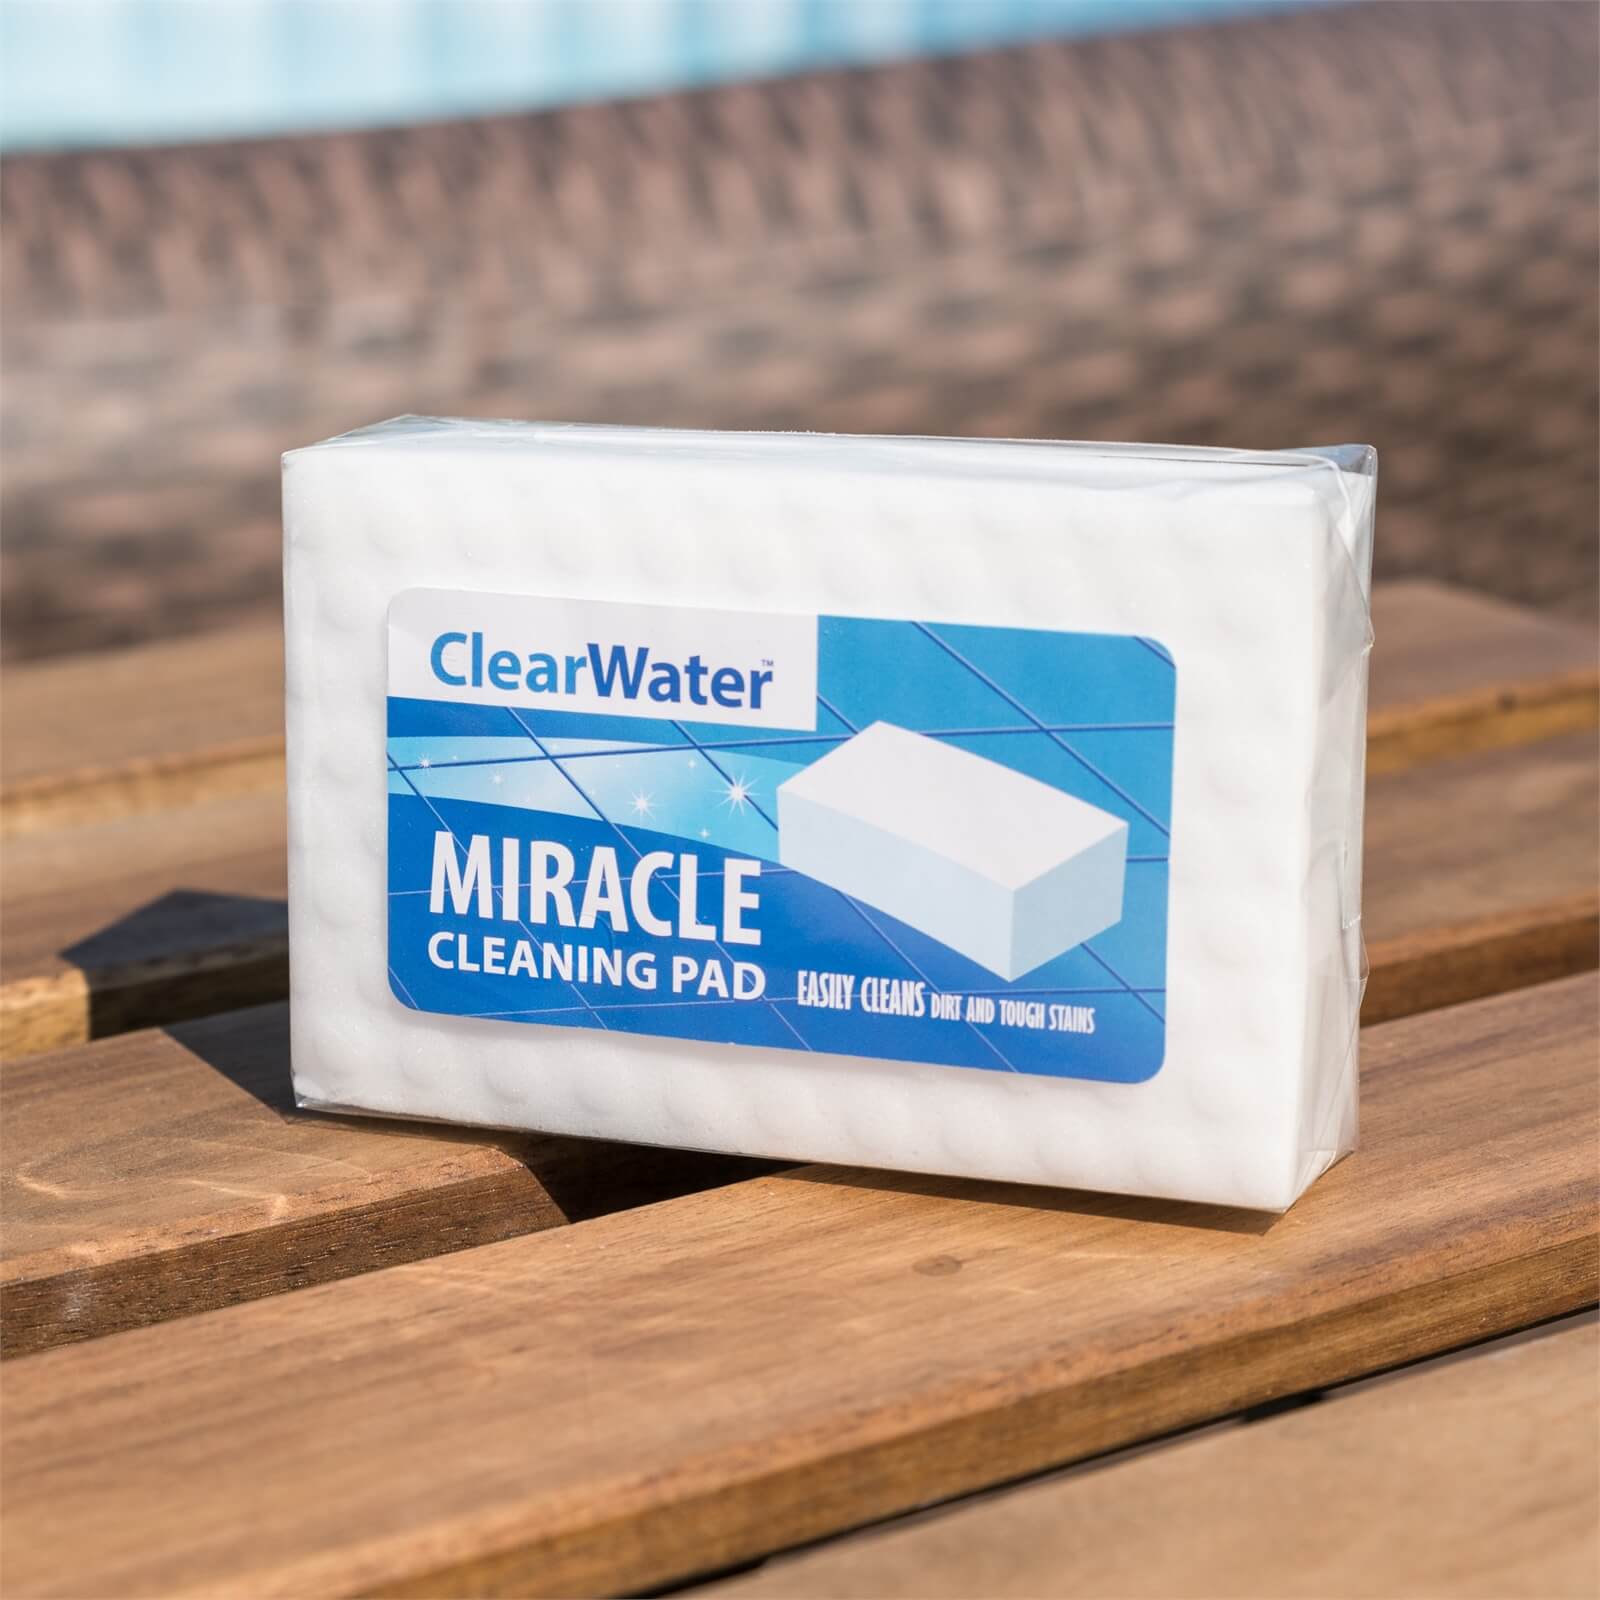 ClearWater Miracle Cleaning Pad Sponge